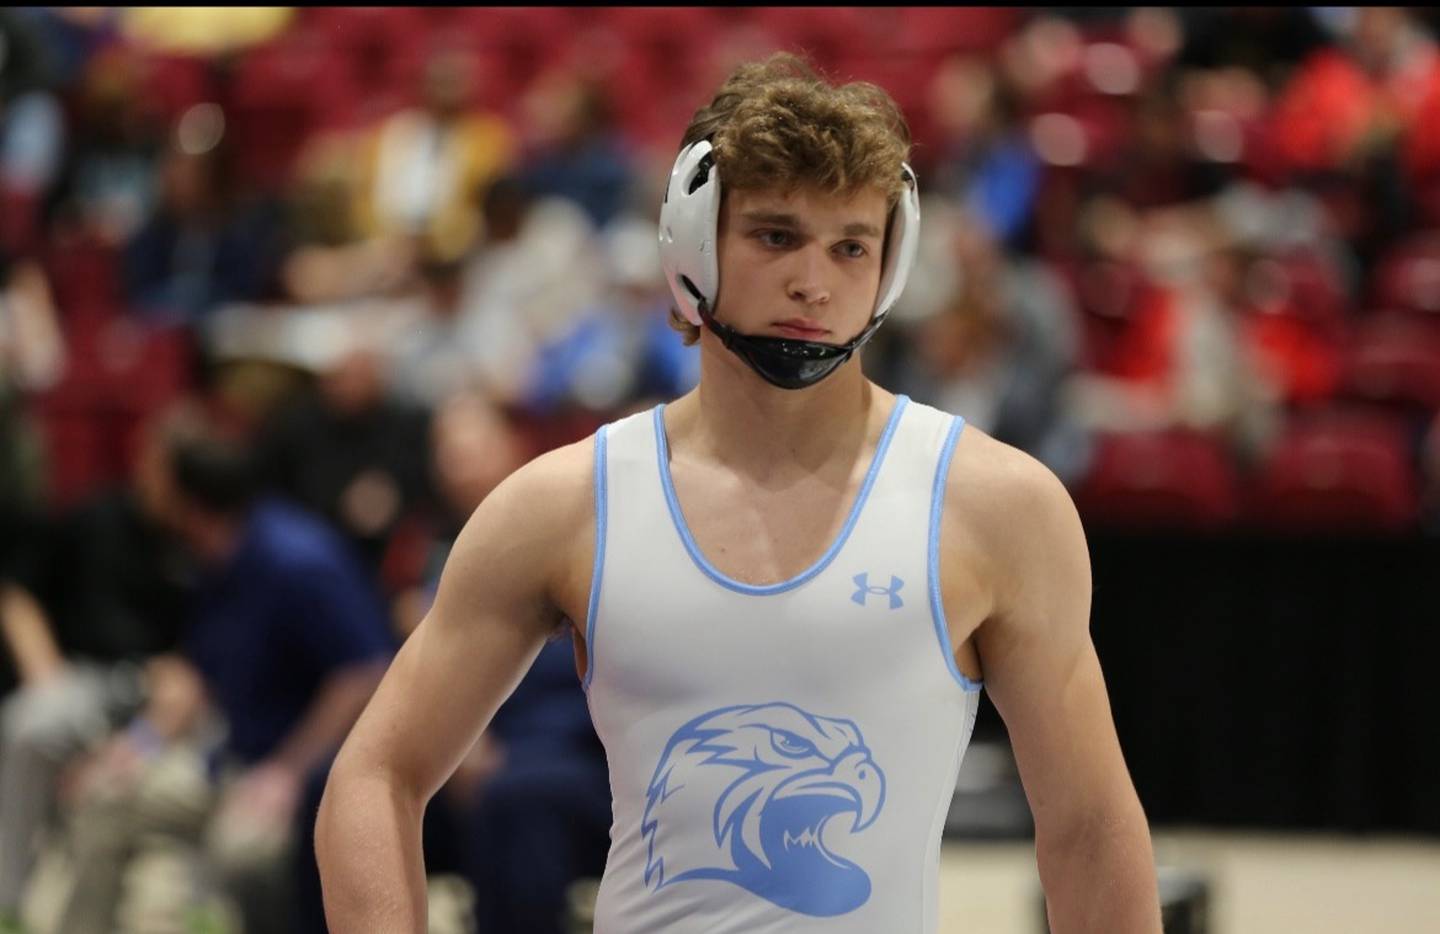 River Hill's 170-pound Dylan McCullough is a returning Howard County and Class 3A East Region champion. After falling by a point away in last year's Class 4A-3A state title match, McCullough is 35-1 this season with 31 pins.